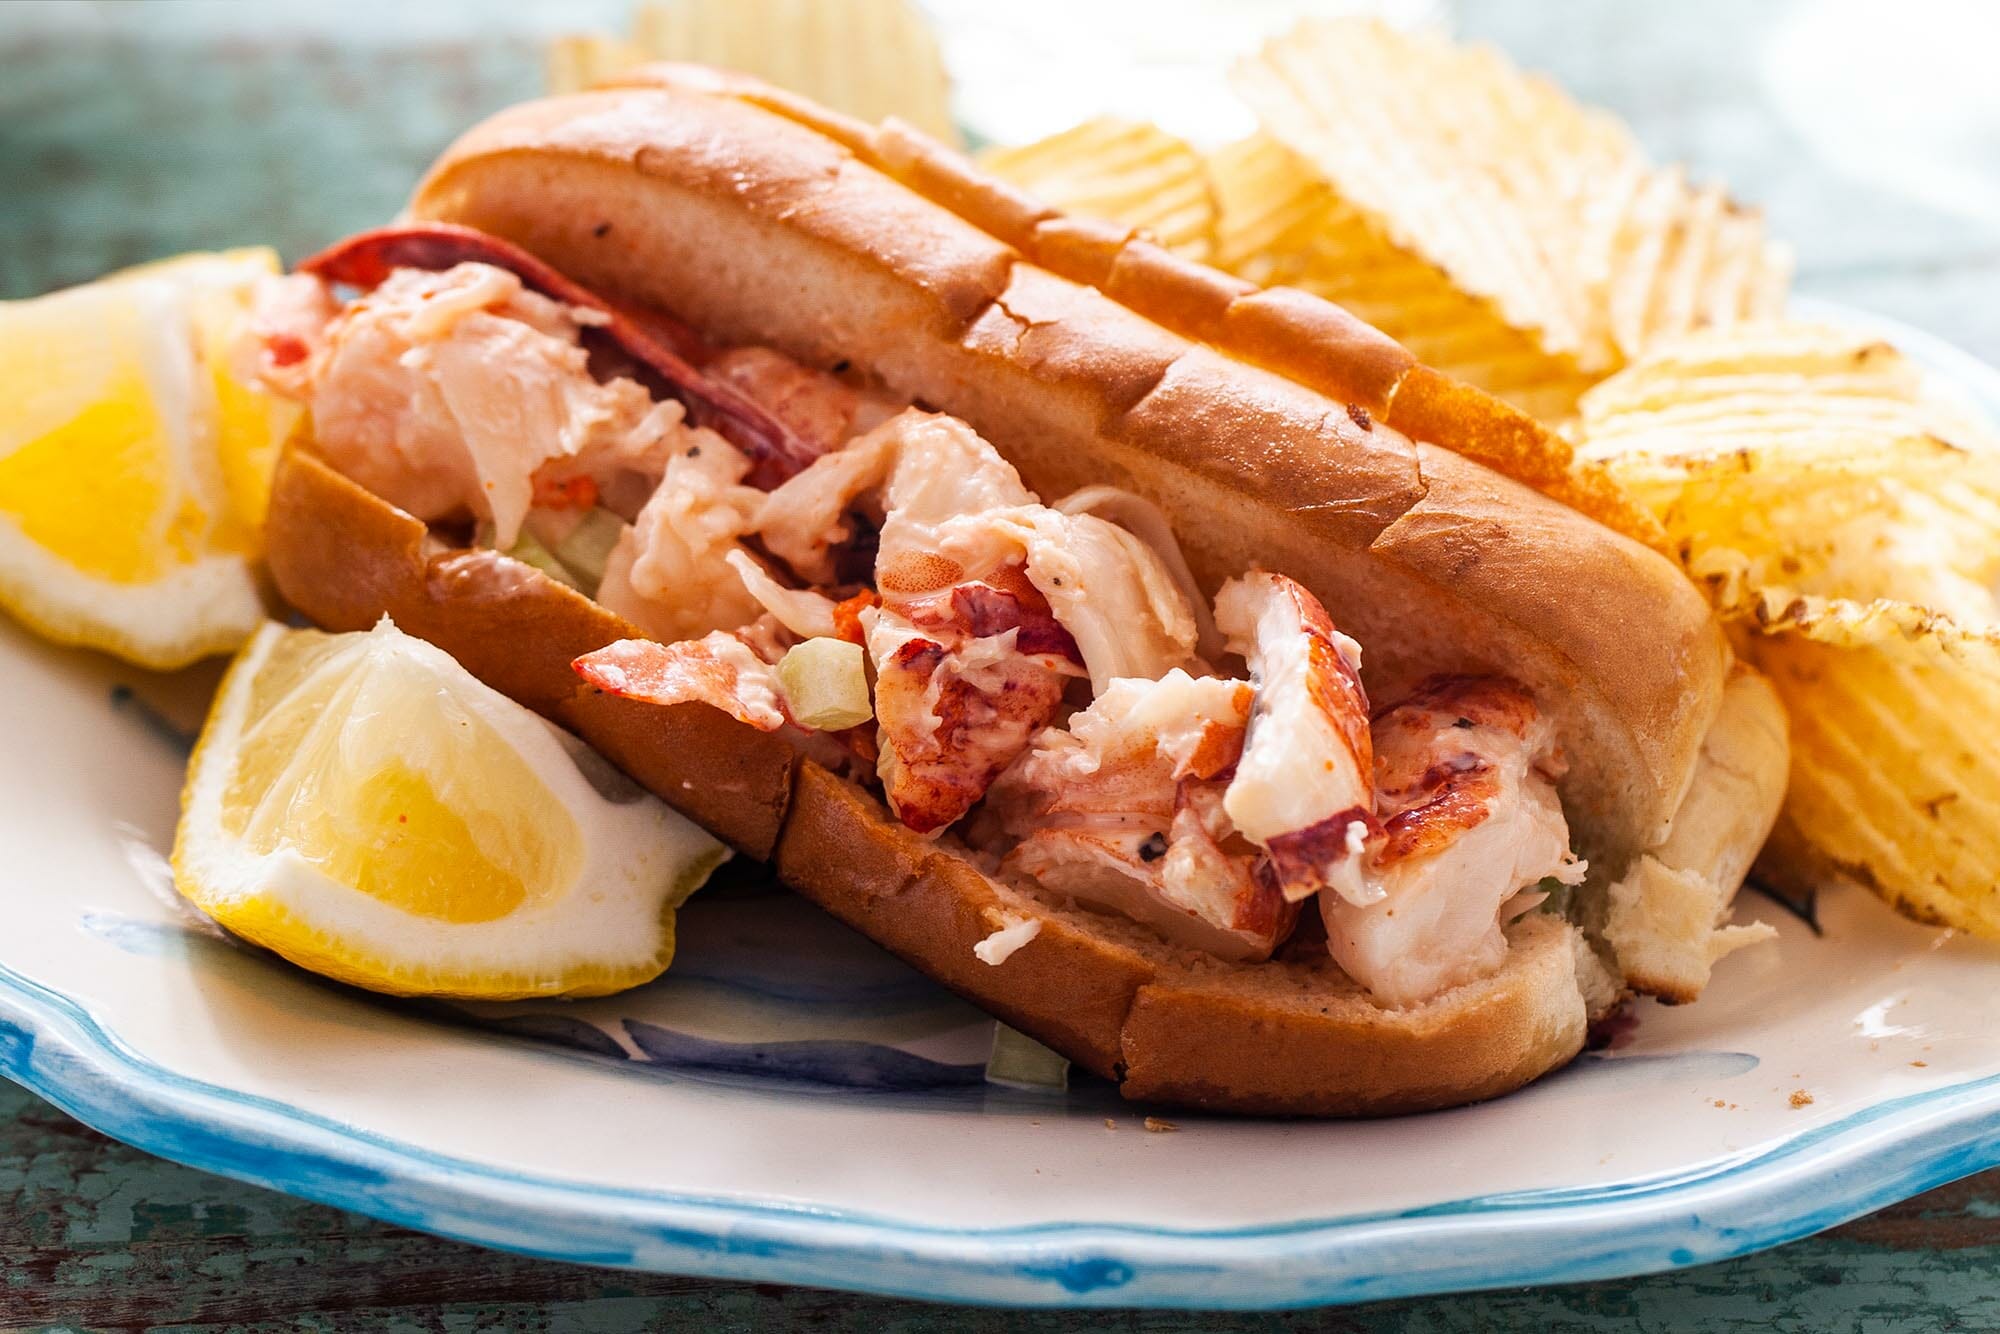 Plate of the best lobster roll recipe served with a side of chips and a lemon wedge.